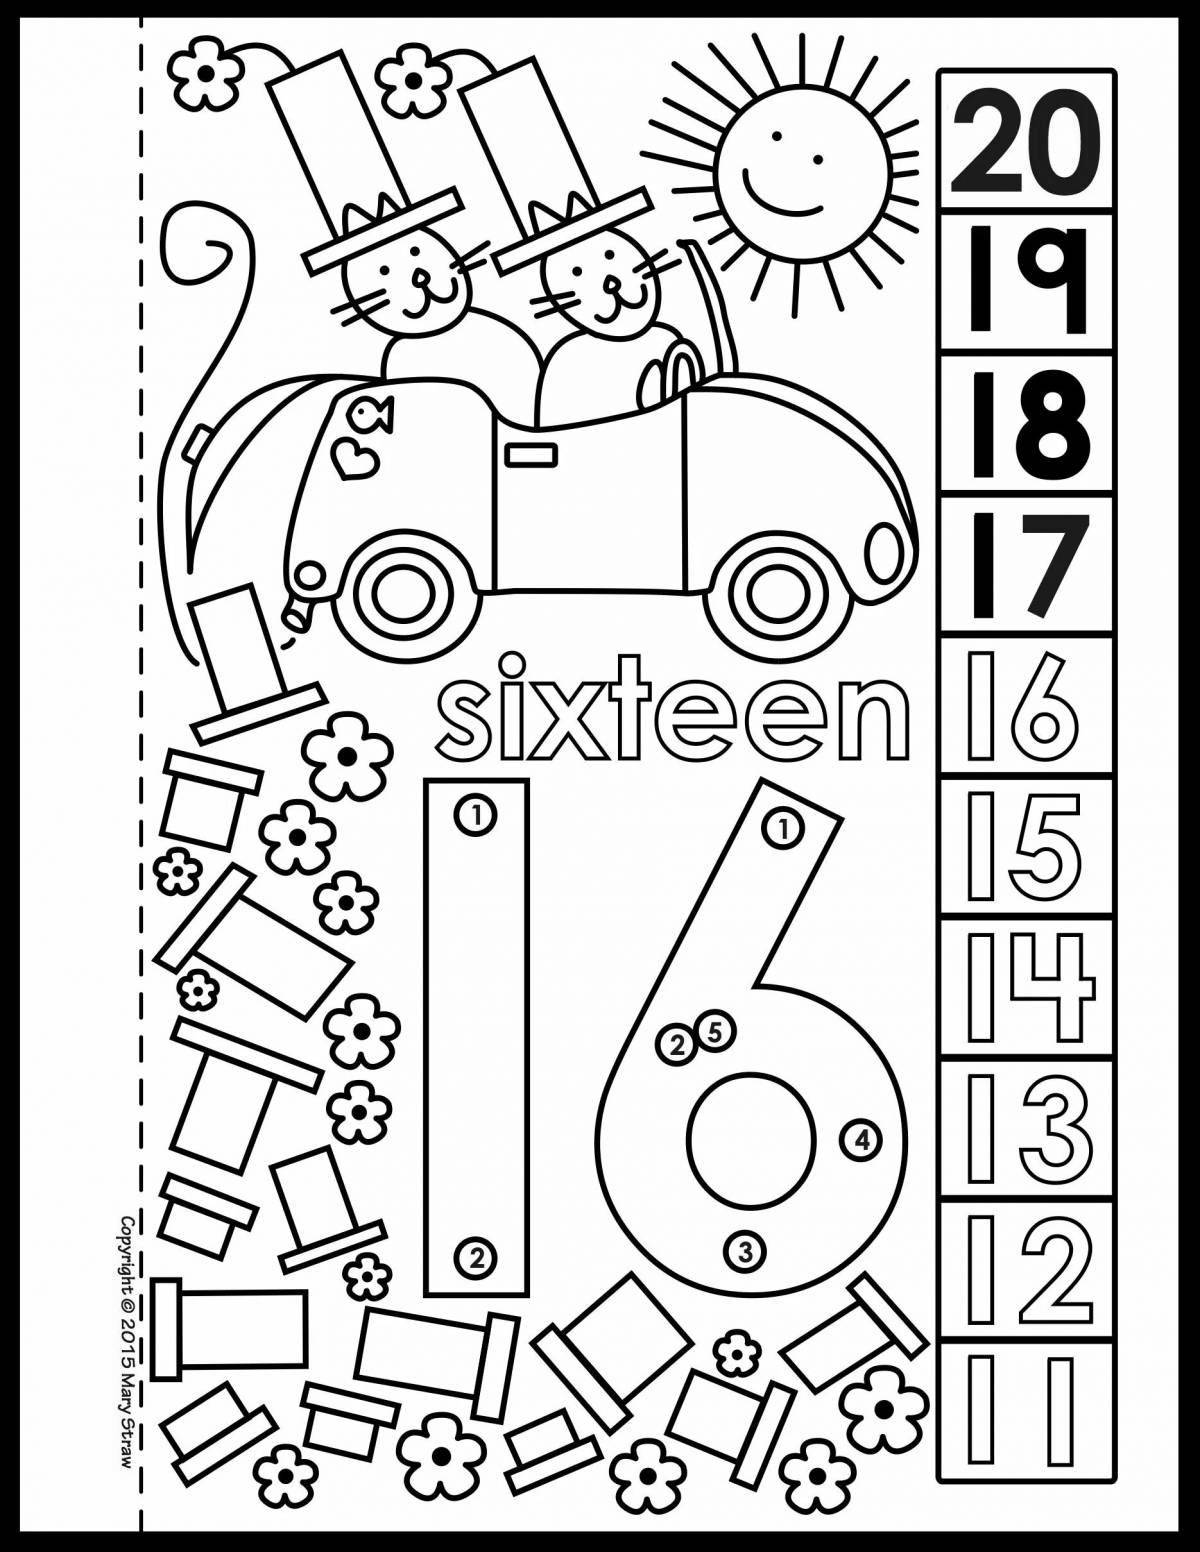 Bright coloring page 20